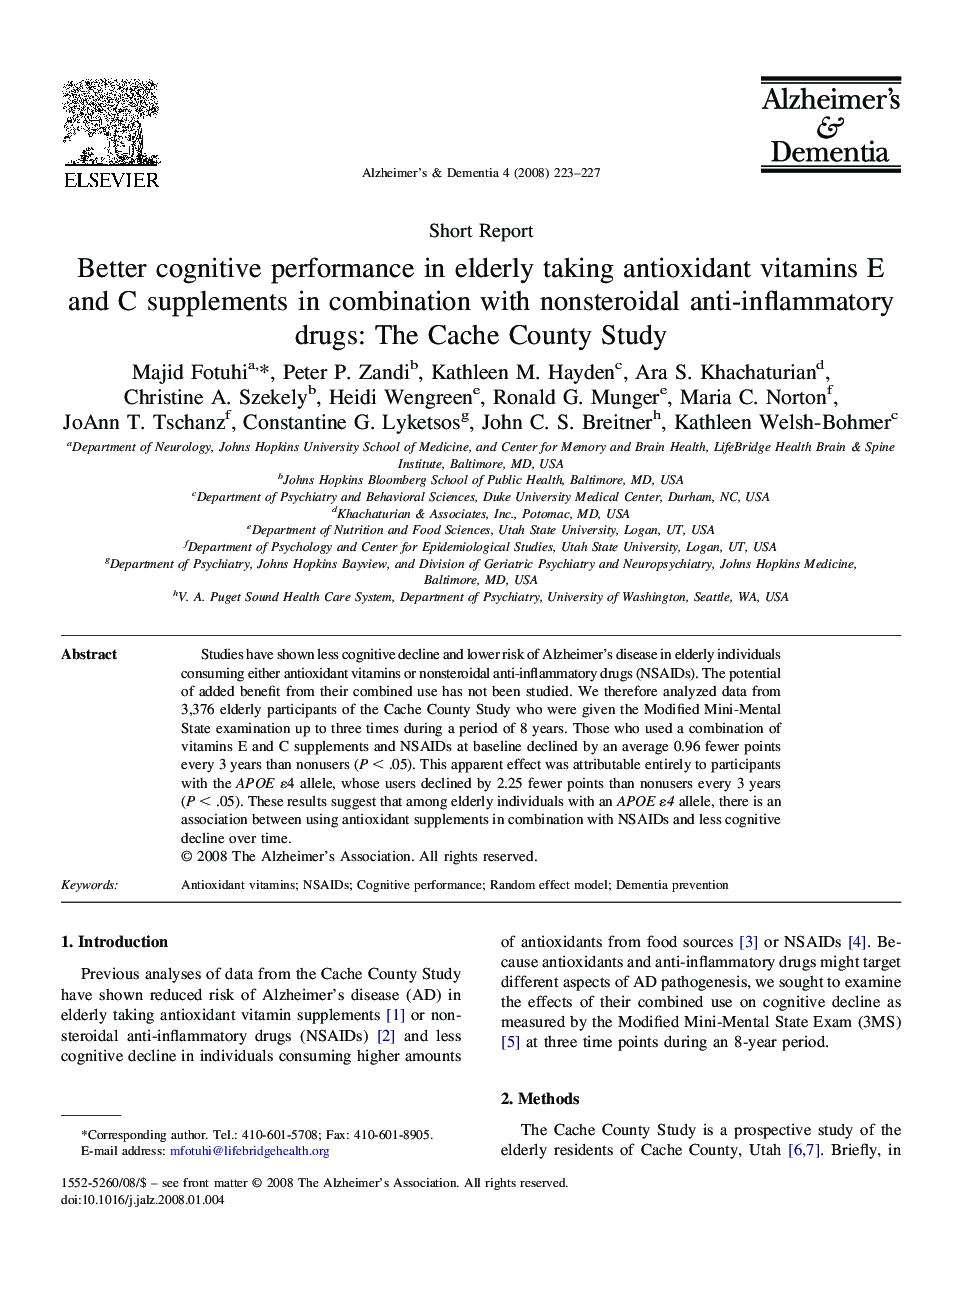 Short reportBetter cognitive performance in elderly taking antioxidant vitamins E and C supplements in combination with nonsteroidal anti-inflammatory drugs: The Cache County Study